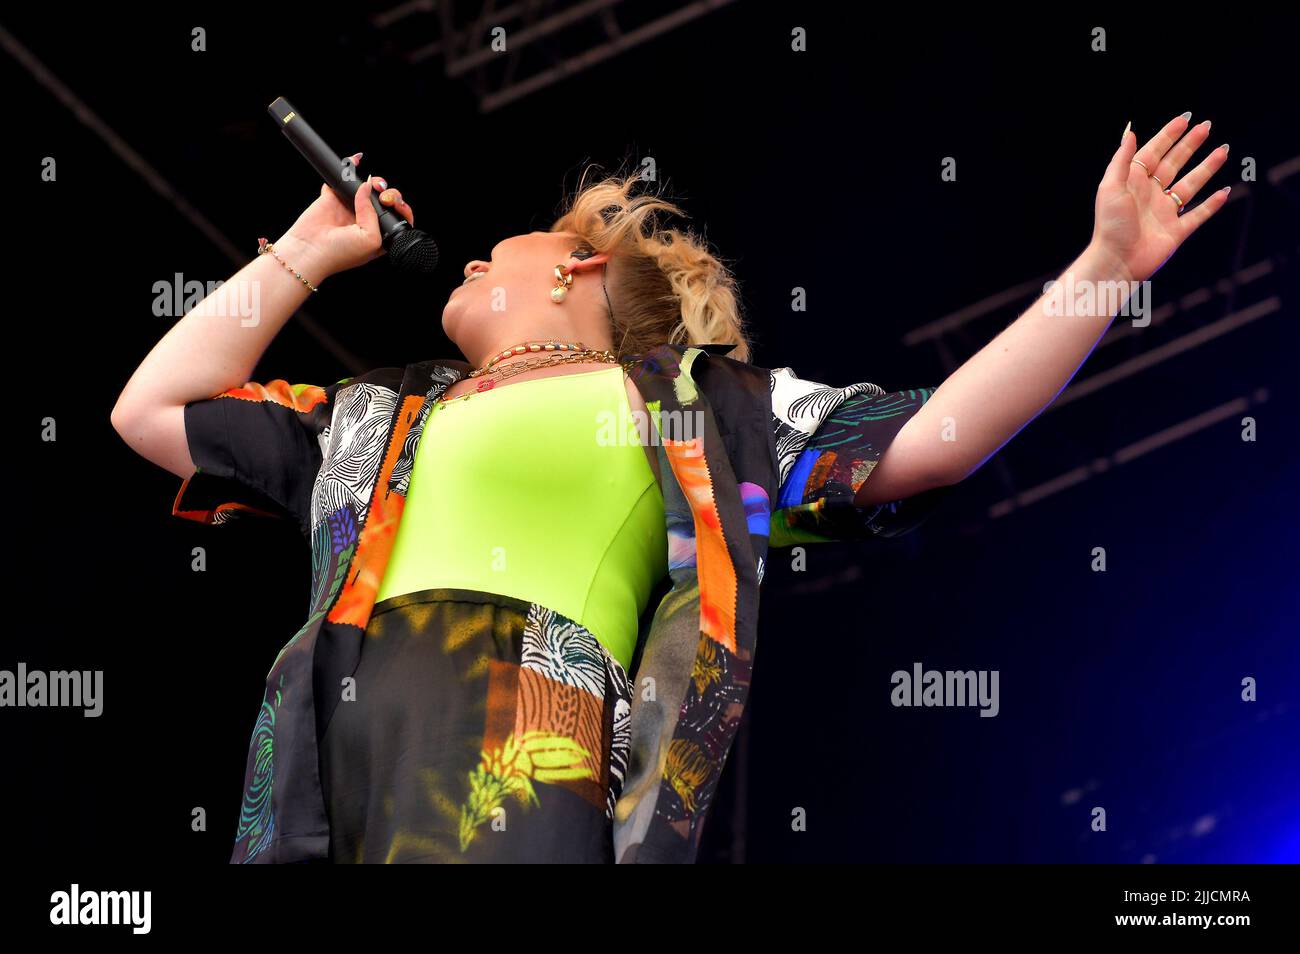 Singer Ella Henderson performing live on stage at South Tyneside music Festival, Bents Park, North East, Uk, July 2022 Stock Photo